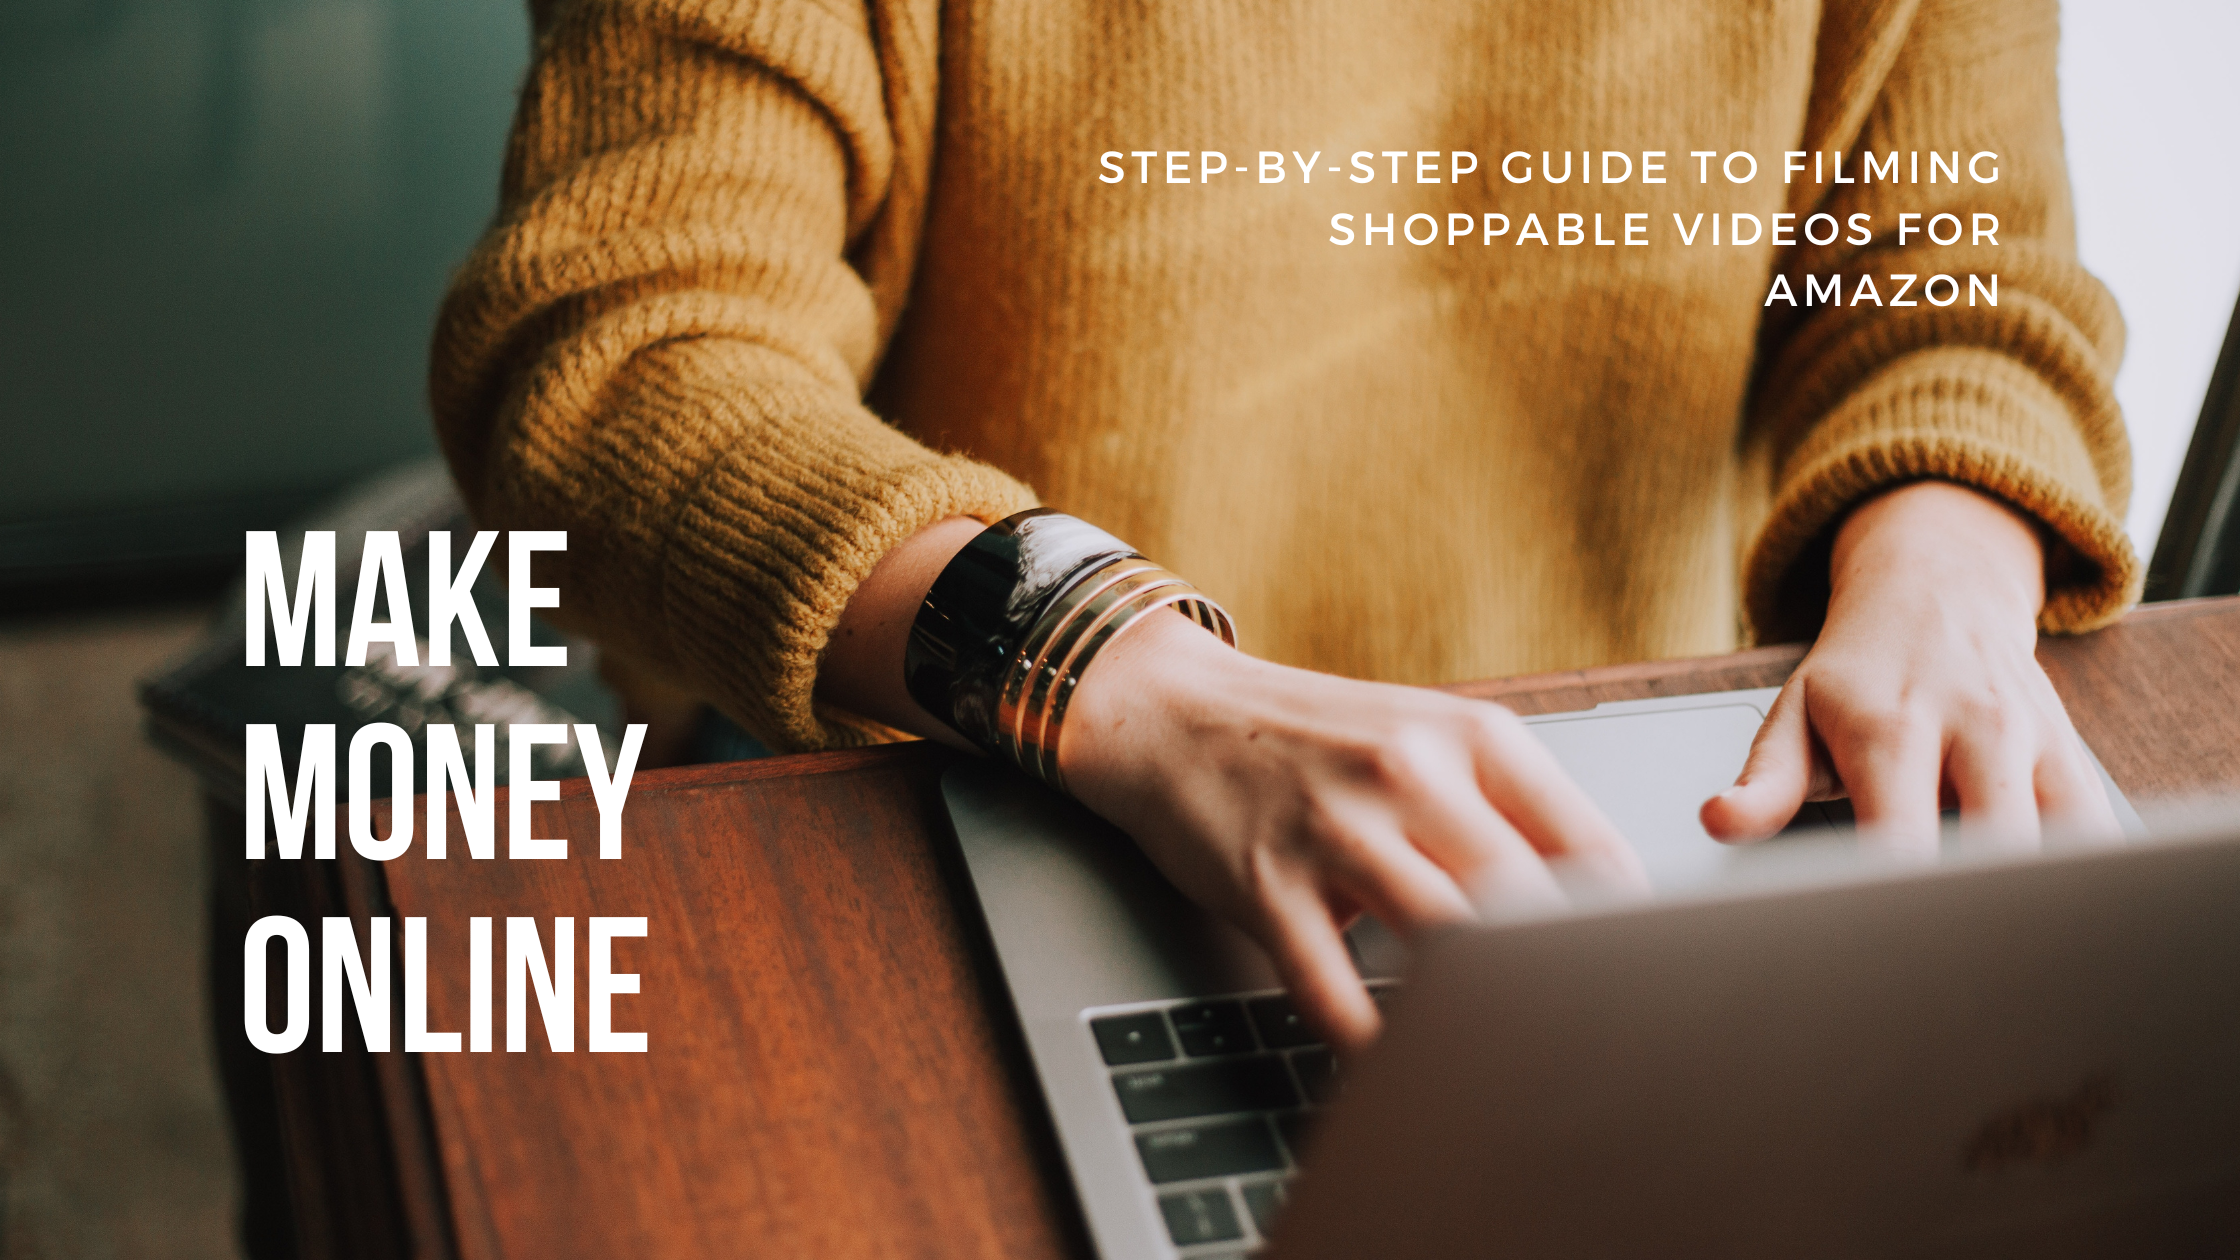 Step-by-Step Guide to Filming Shoppable Videos for Amazon: